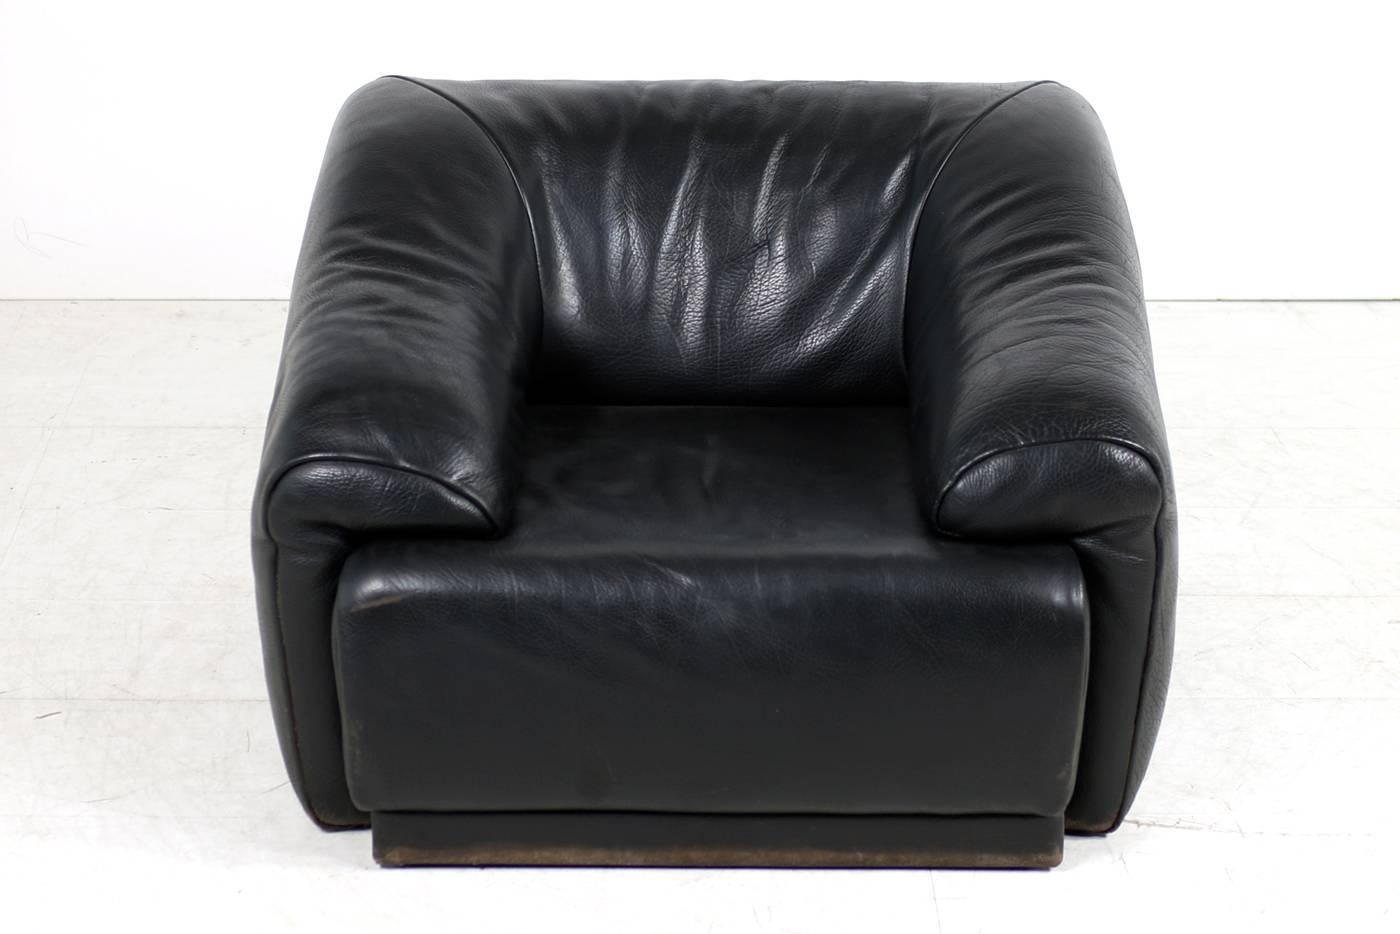 Rare 1970s Organic Buffalo Leather Lounge Chair in High Quality, Black 2